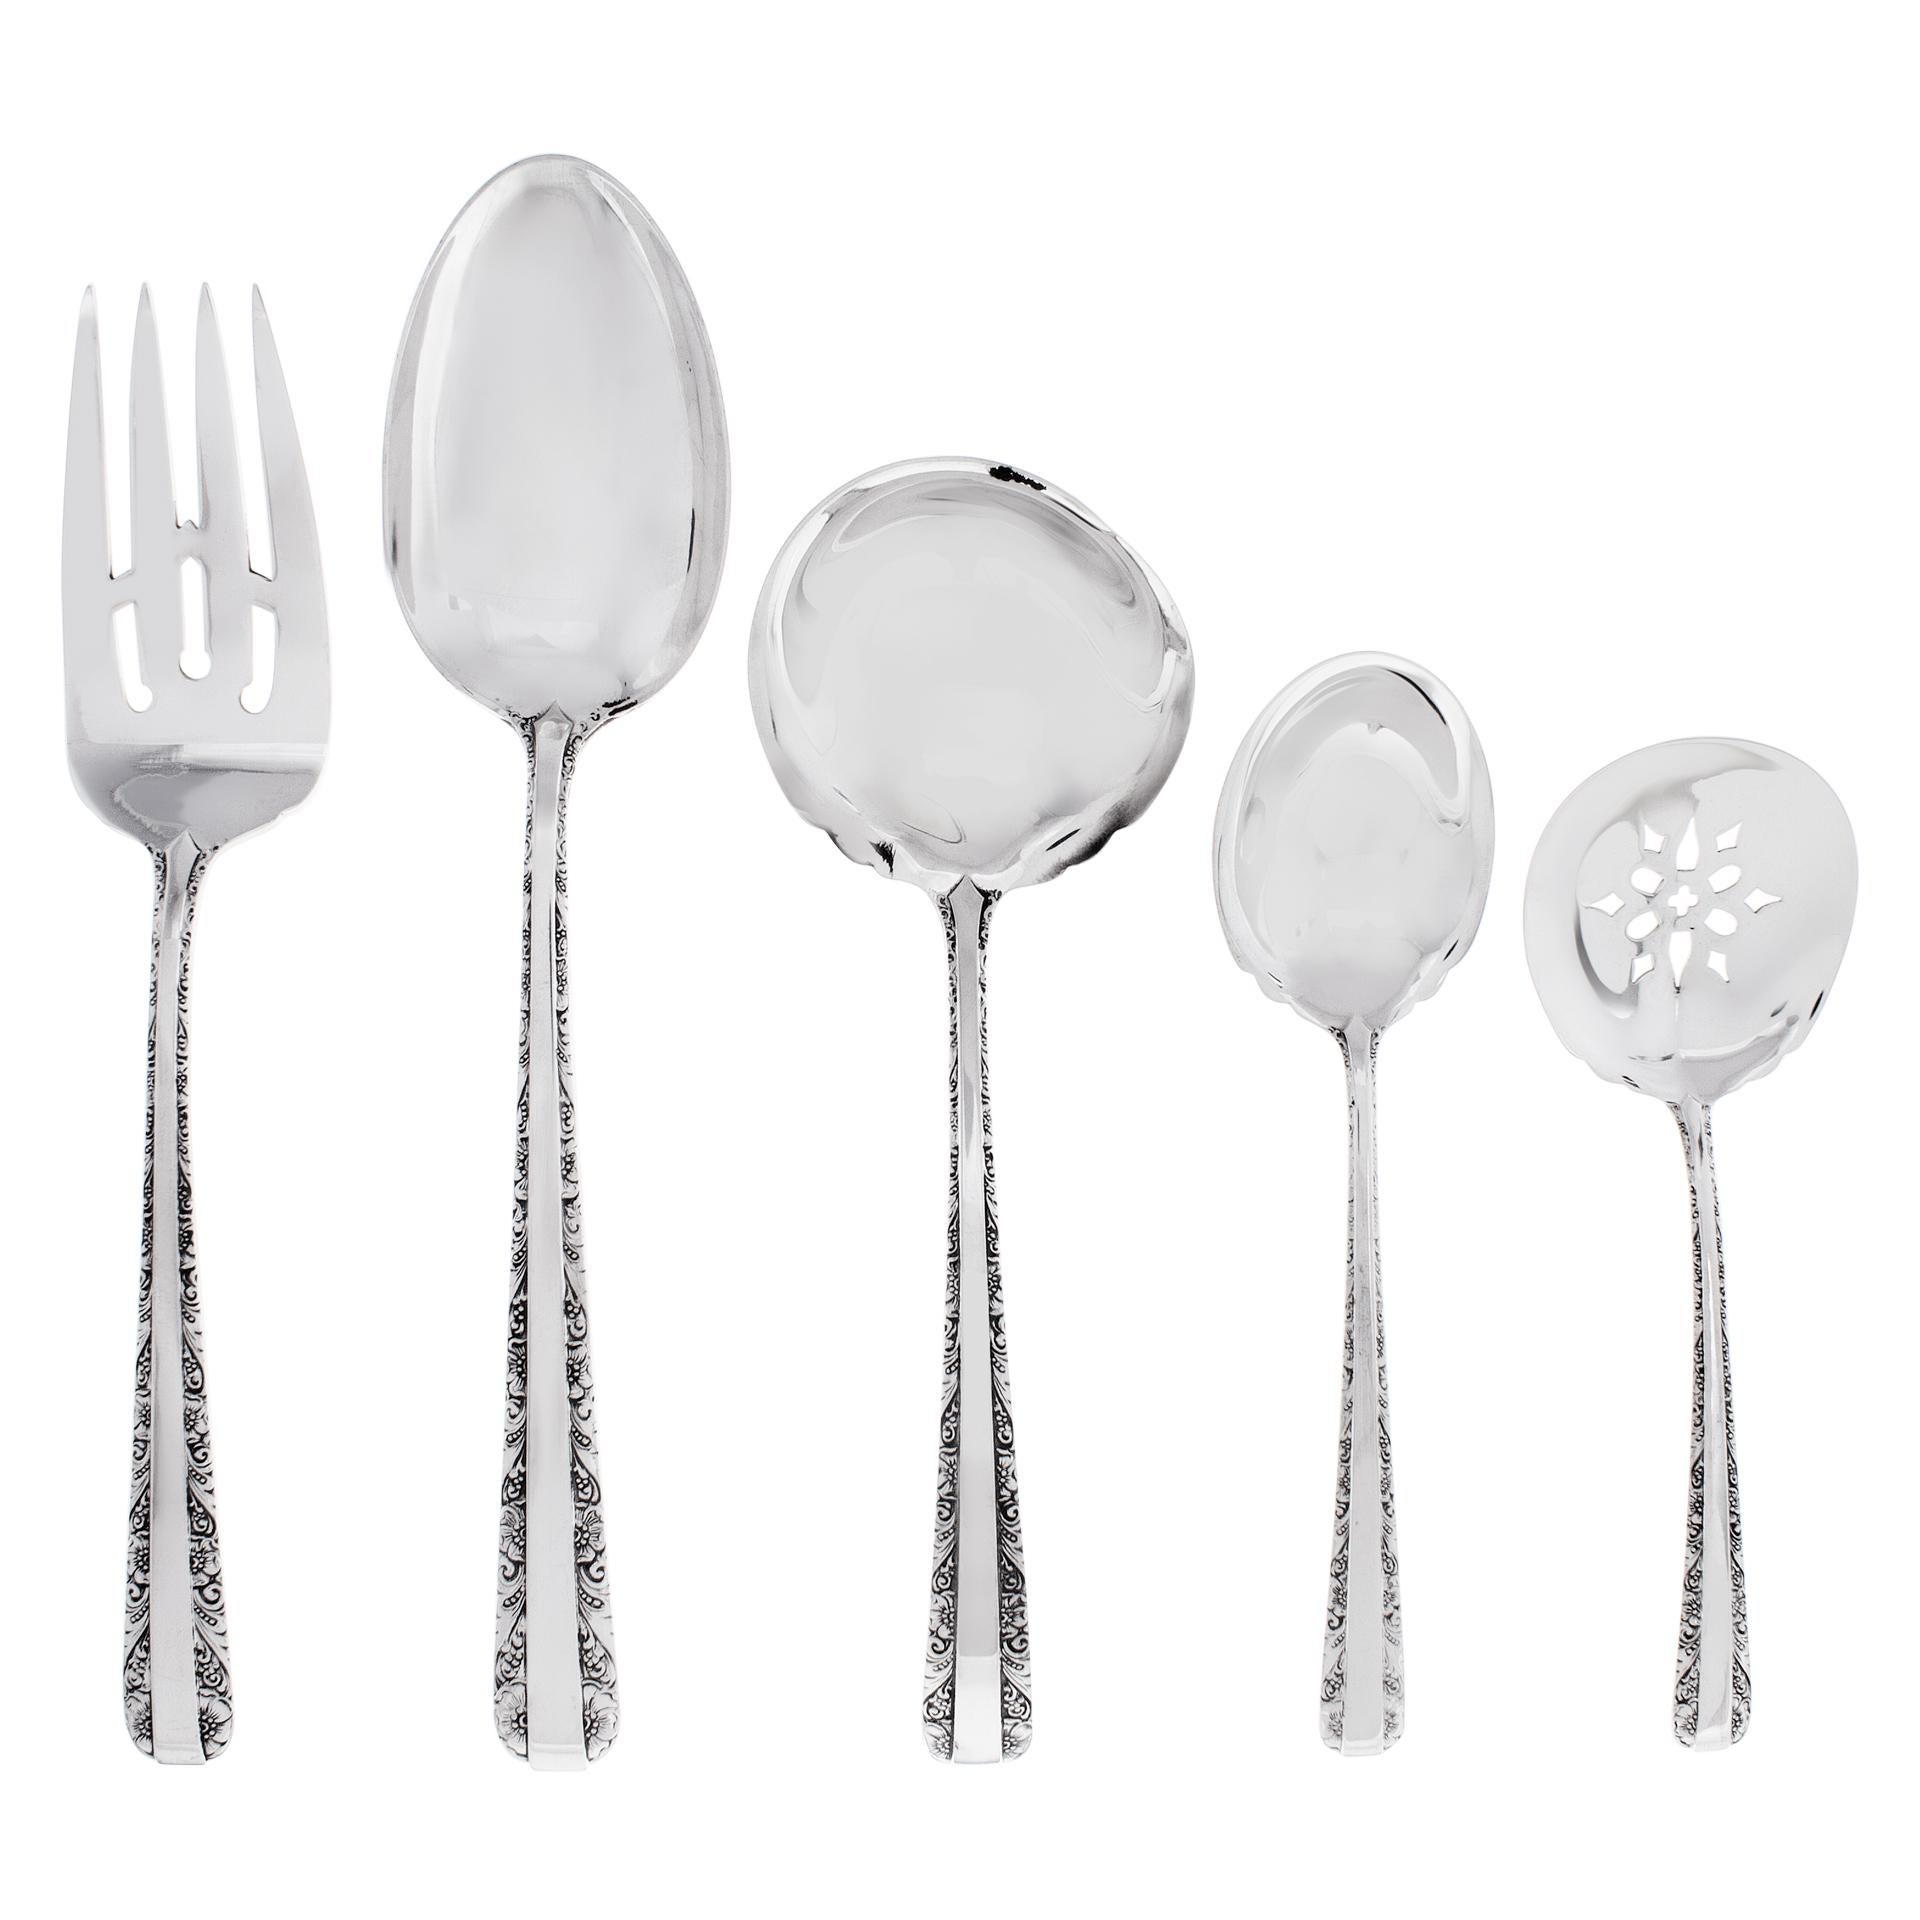 Candlelight Sterling Silver Flatware set patented In 1934 By Towle silversmiths. 5 place setting for 8 (+ 5 soup spoon) with 9 serving pieces. Over 1800 grams of sterling silver. PLACE SETTING: 8 place knife (8 3/4